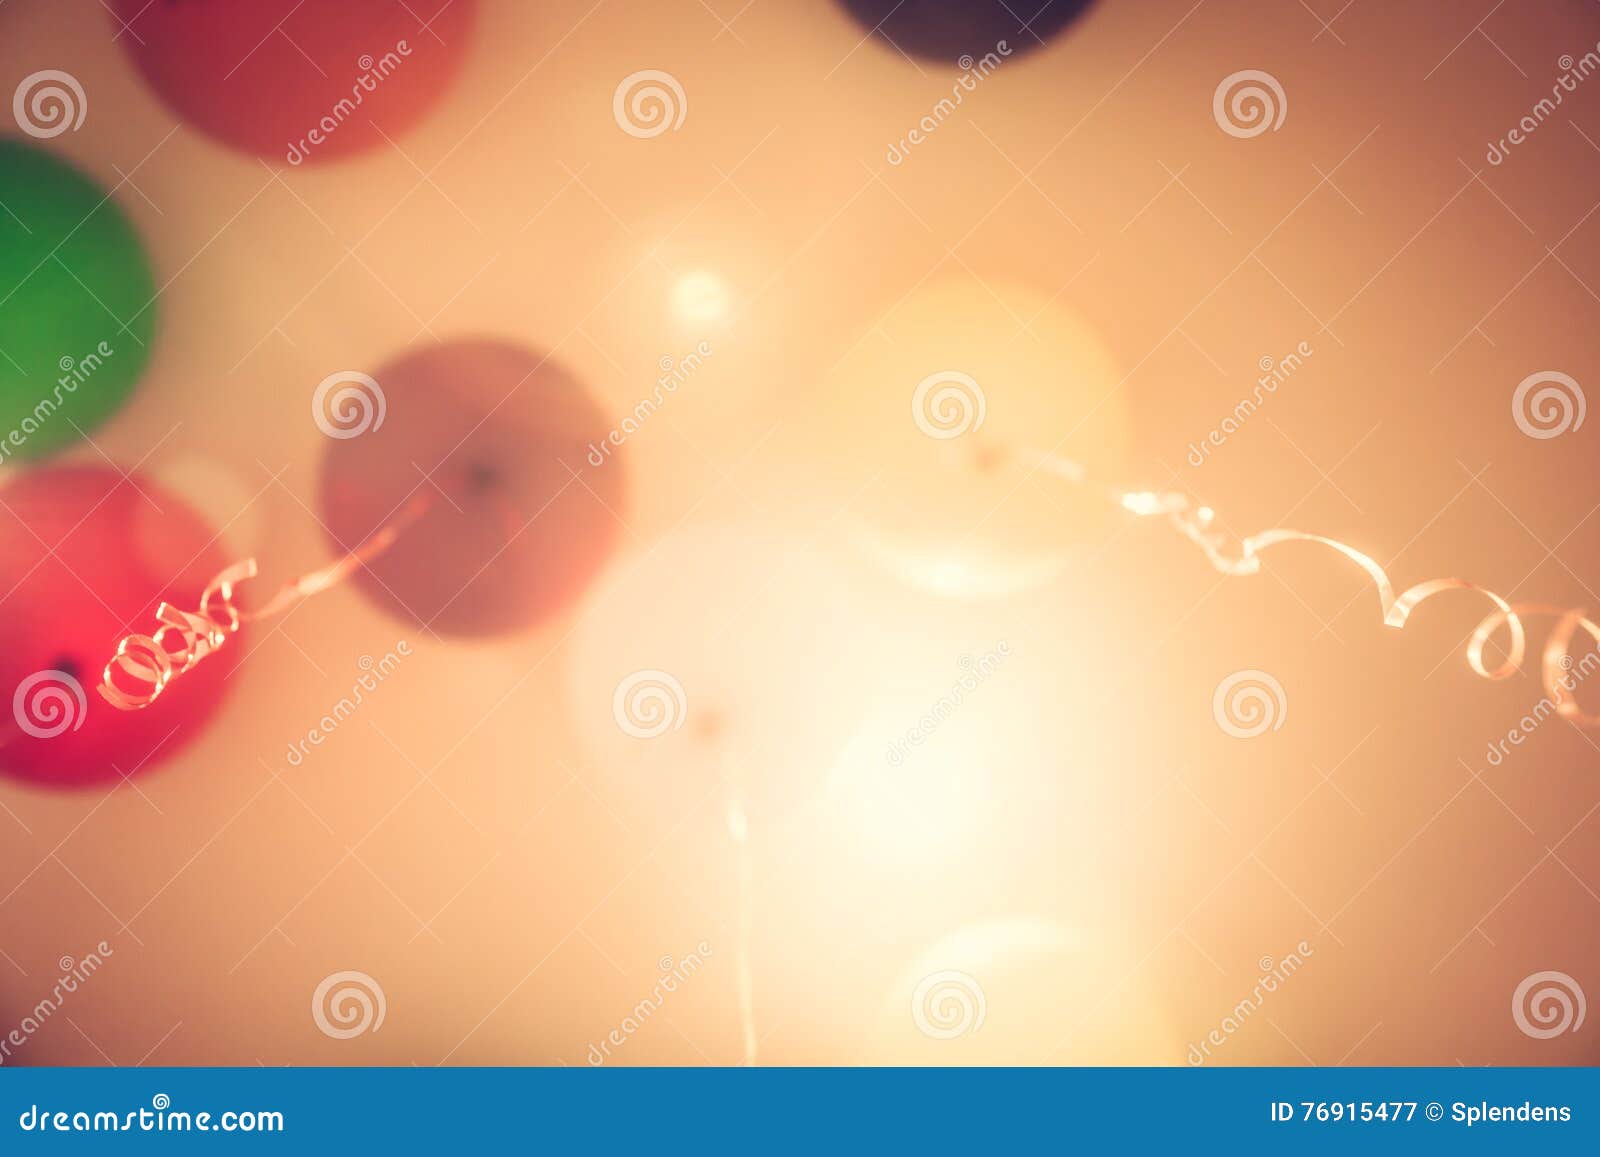 Colourful Vintage Balloons with Selective Focus As Happy Birthday Background  Stock Image - Image of light, backgrounds: 76915477